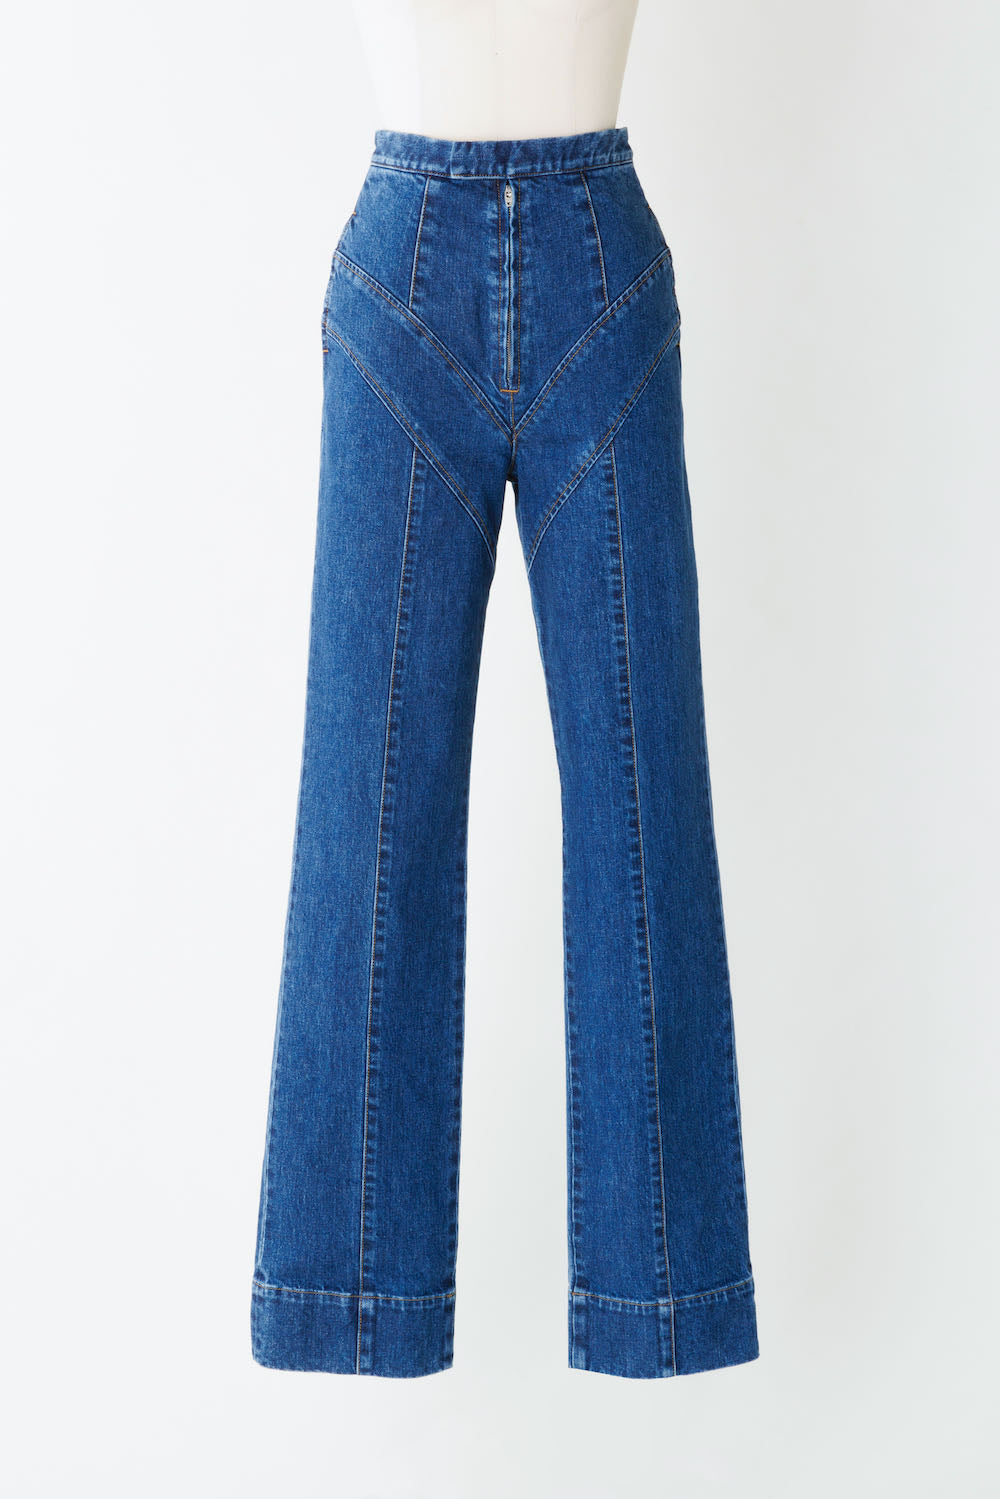 FETICO(フェティコ)のWASHED HIGH RISE STRAIGHT JEANS ...